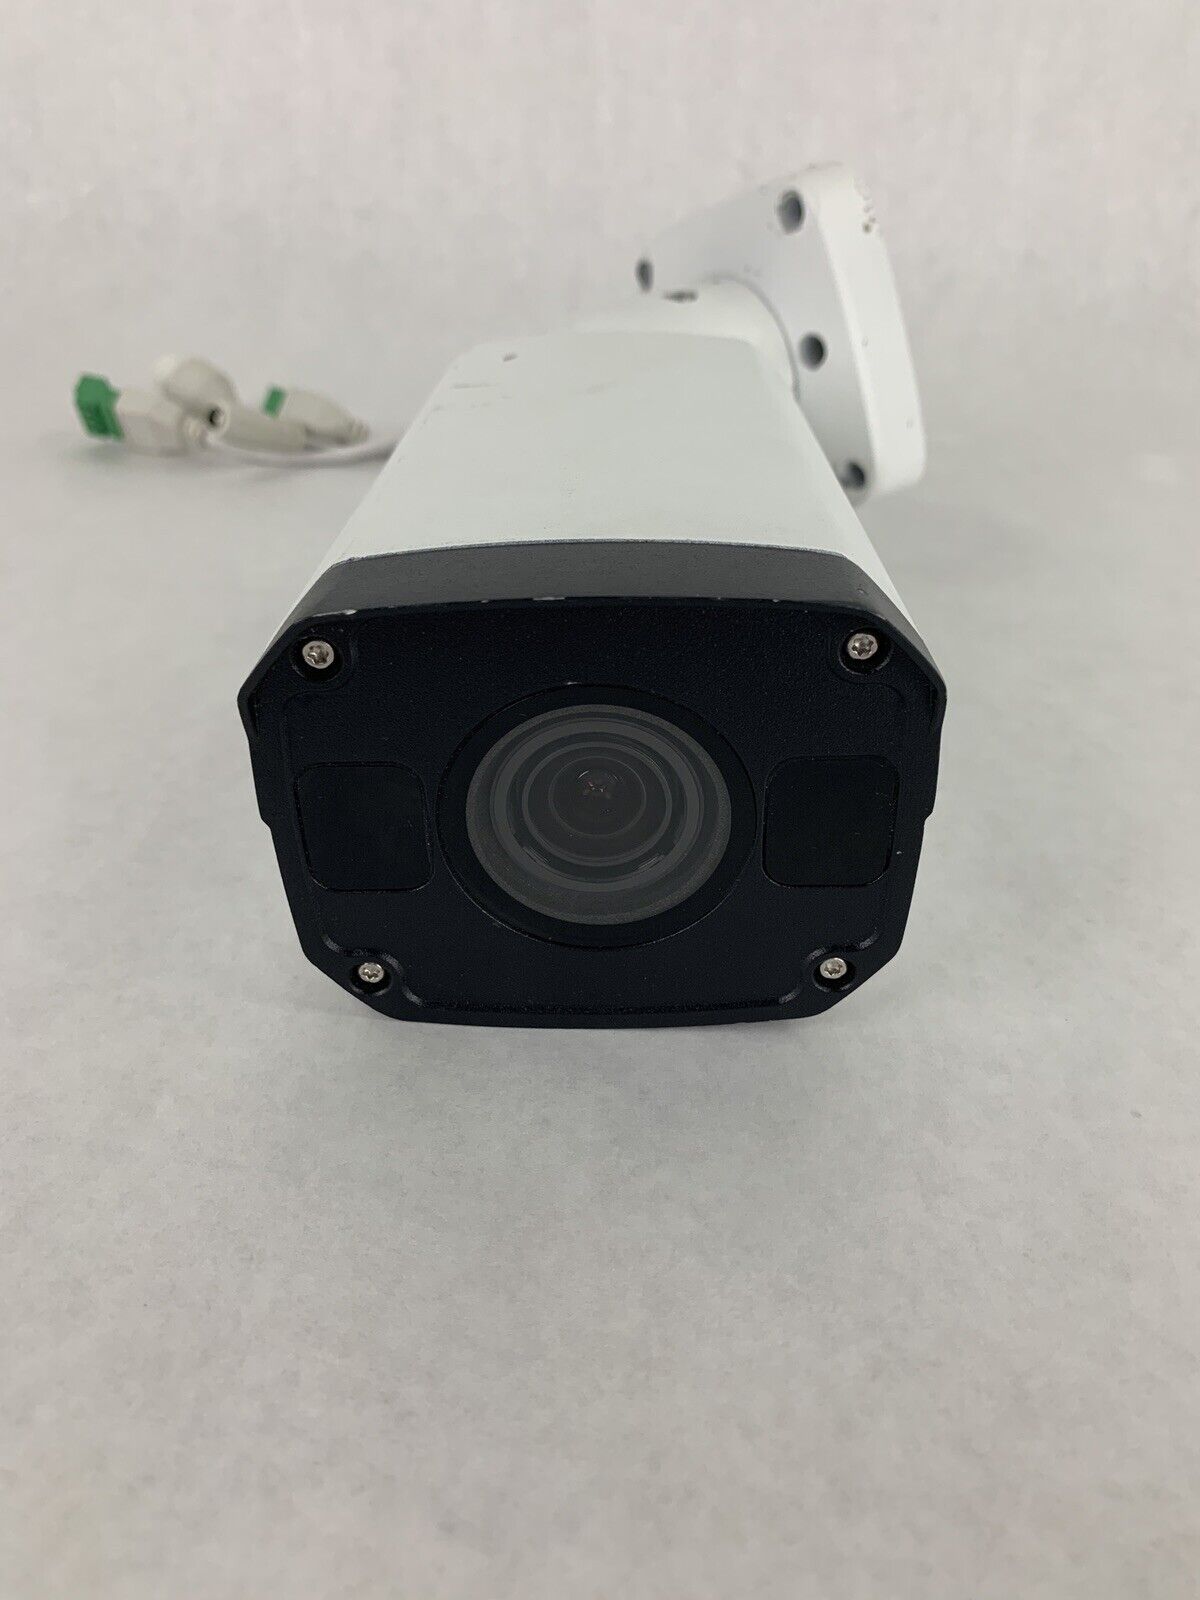 Uniview Technology IPB5213M 5MP WDR Lighthunter Bullet Camera Tested